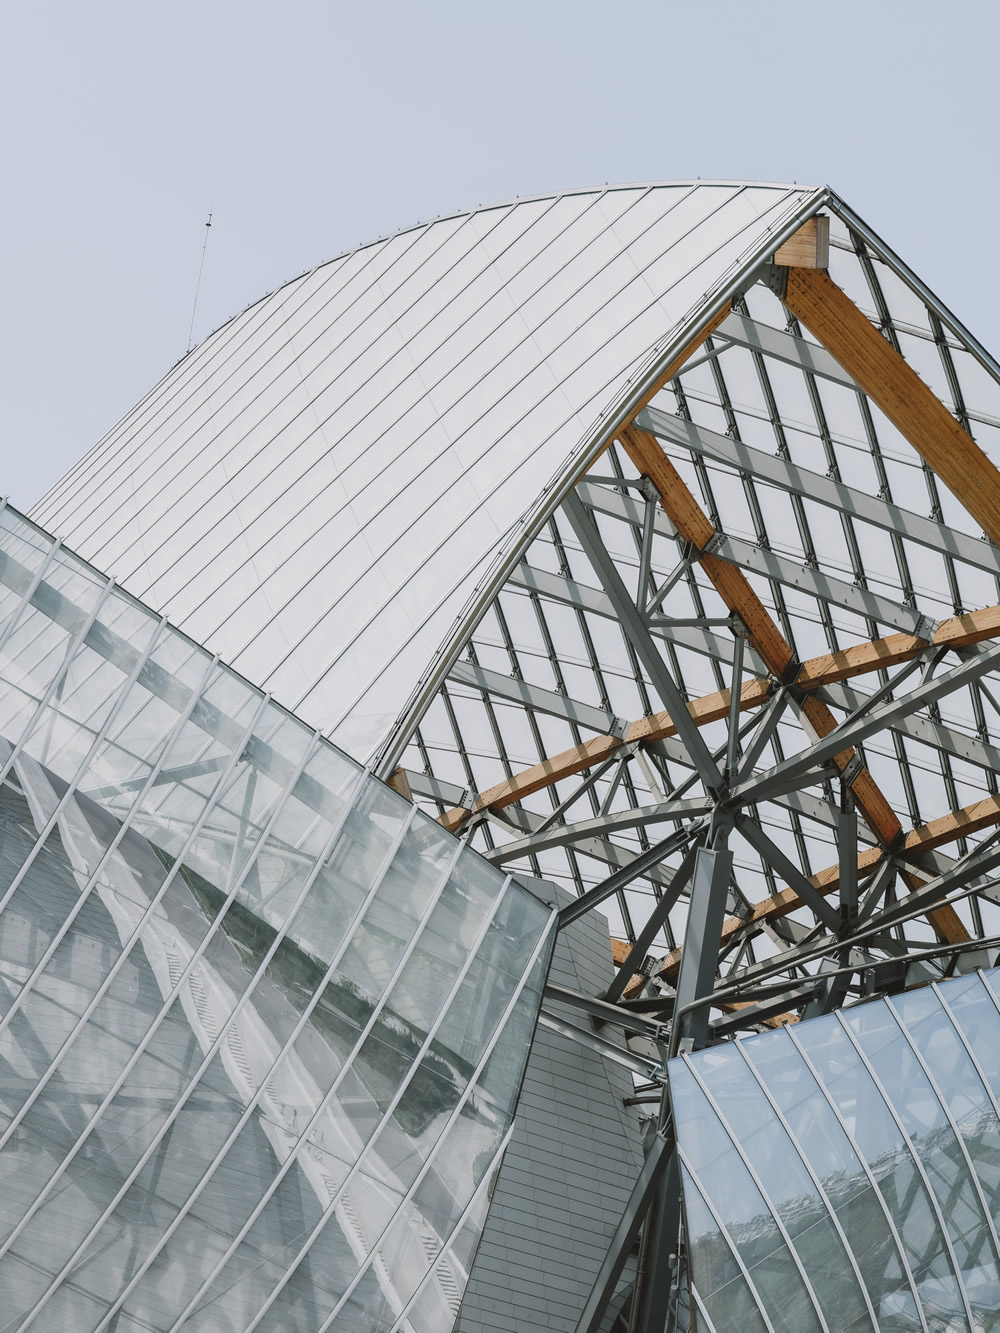 Visiting Fondation Louis Vuitton is a must-do